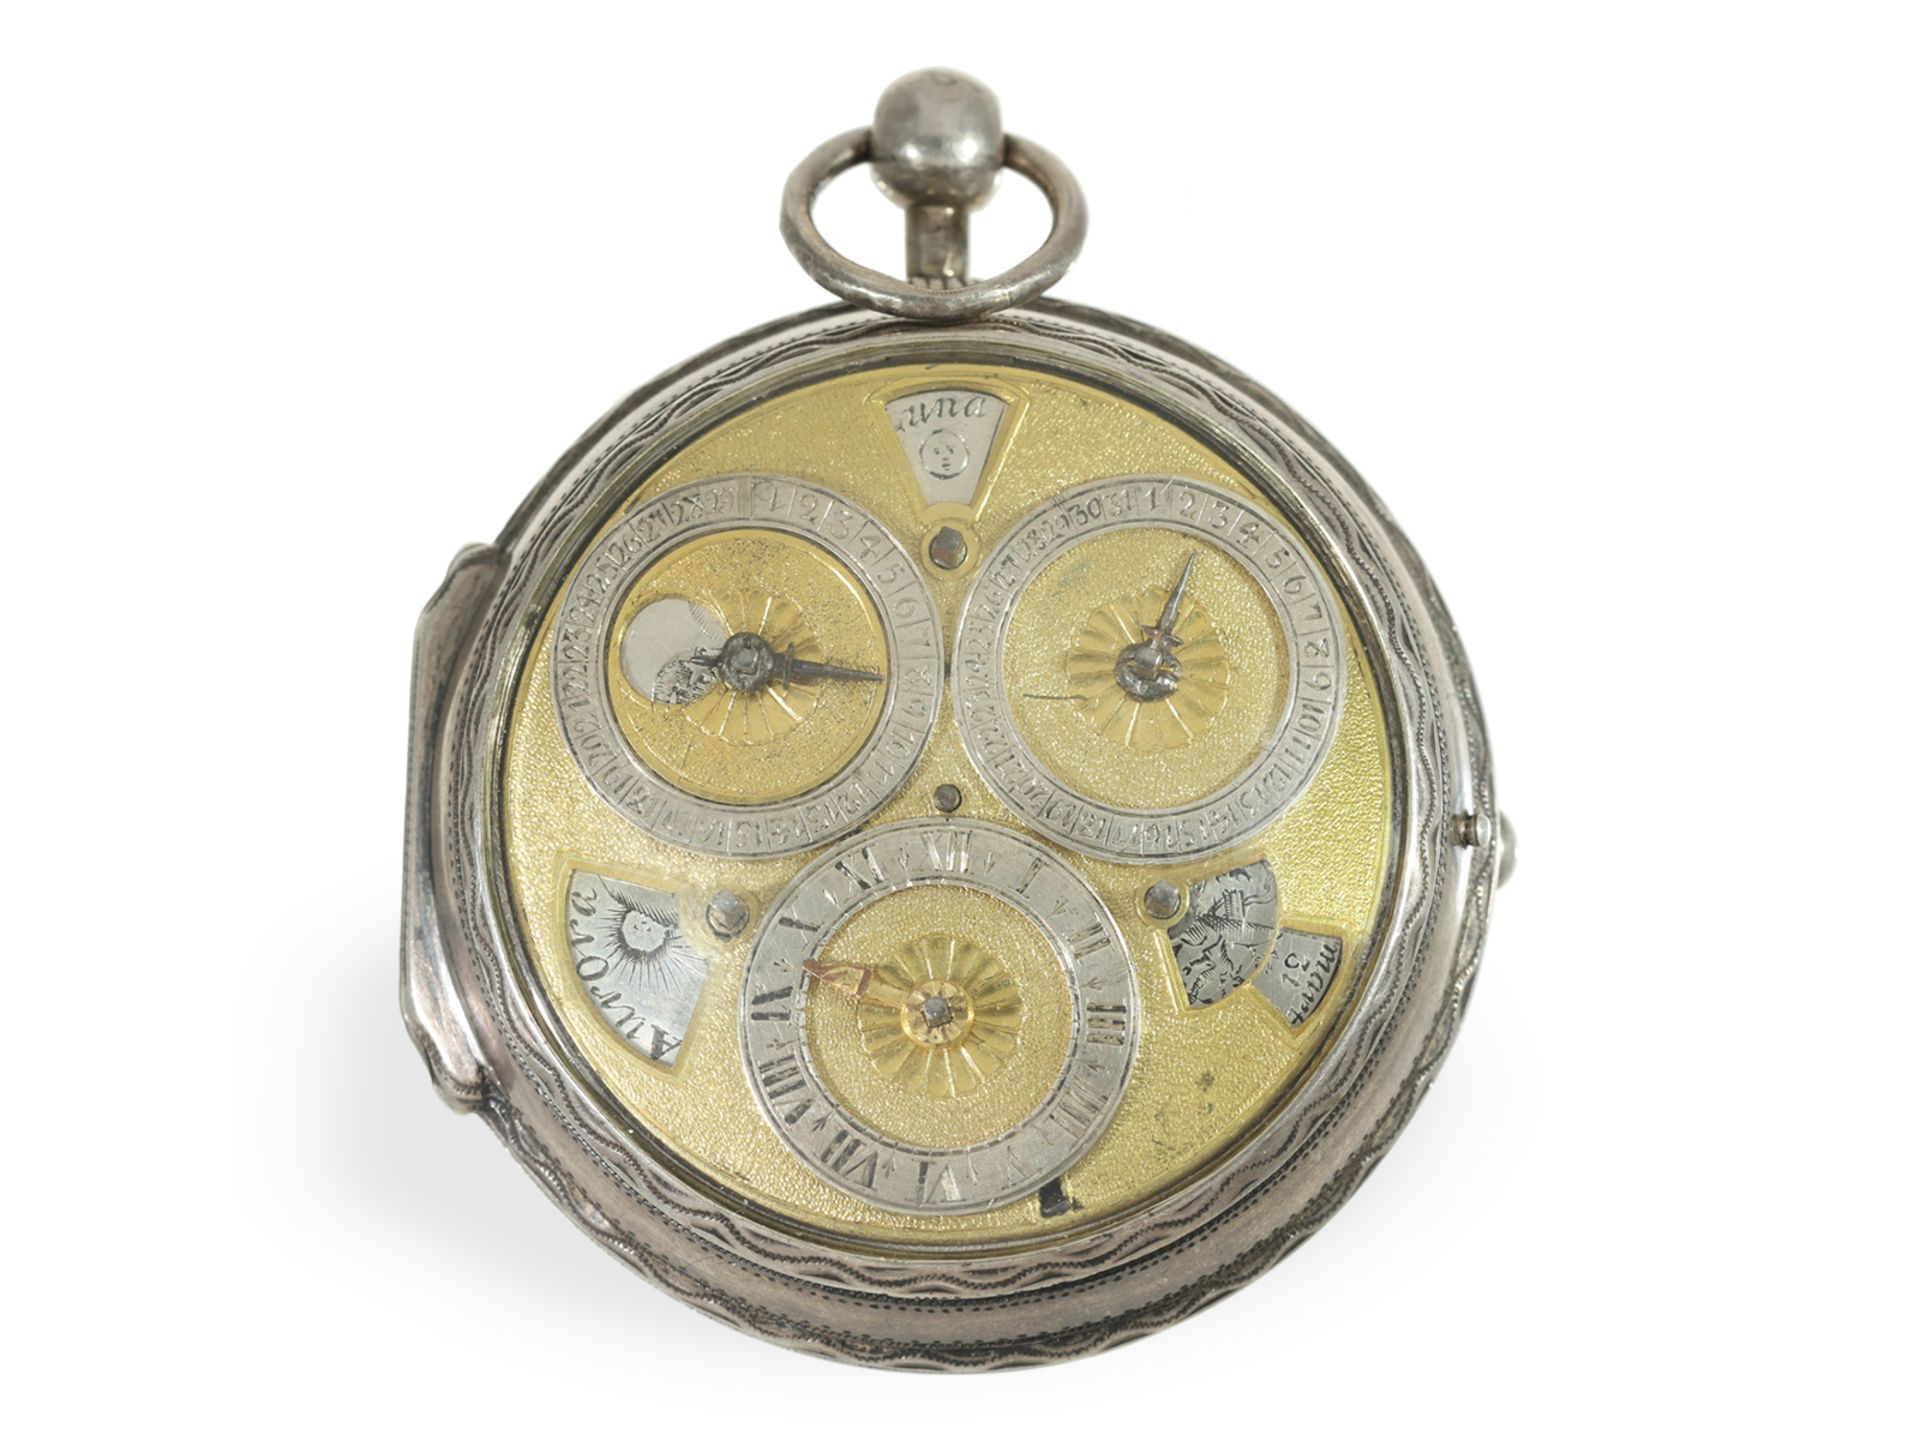 Pocket watch: museum astronomical verge watch with 6 complications, R. Jarrett London around 1690